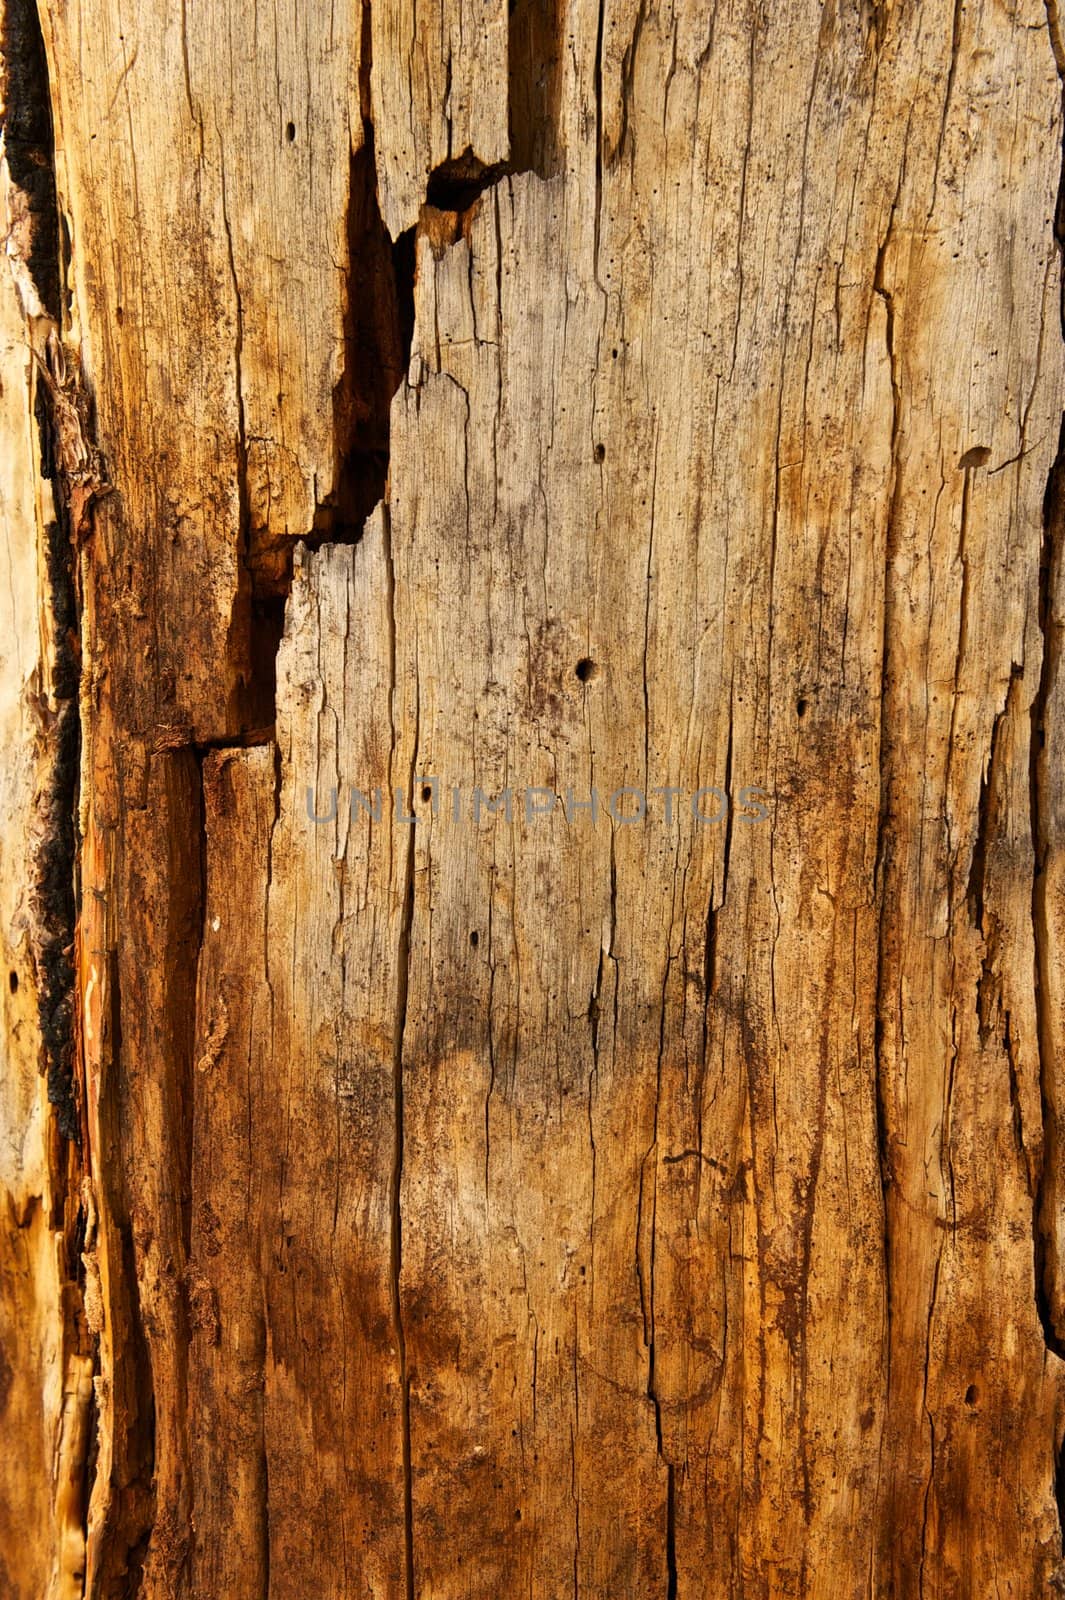 Tree trunk with many cracks and marks in it